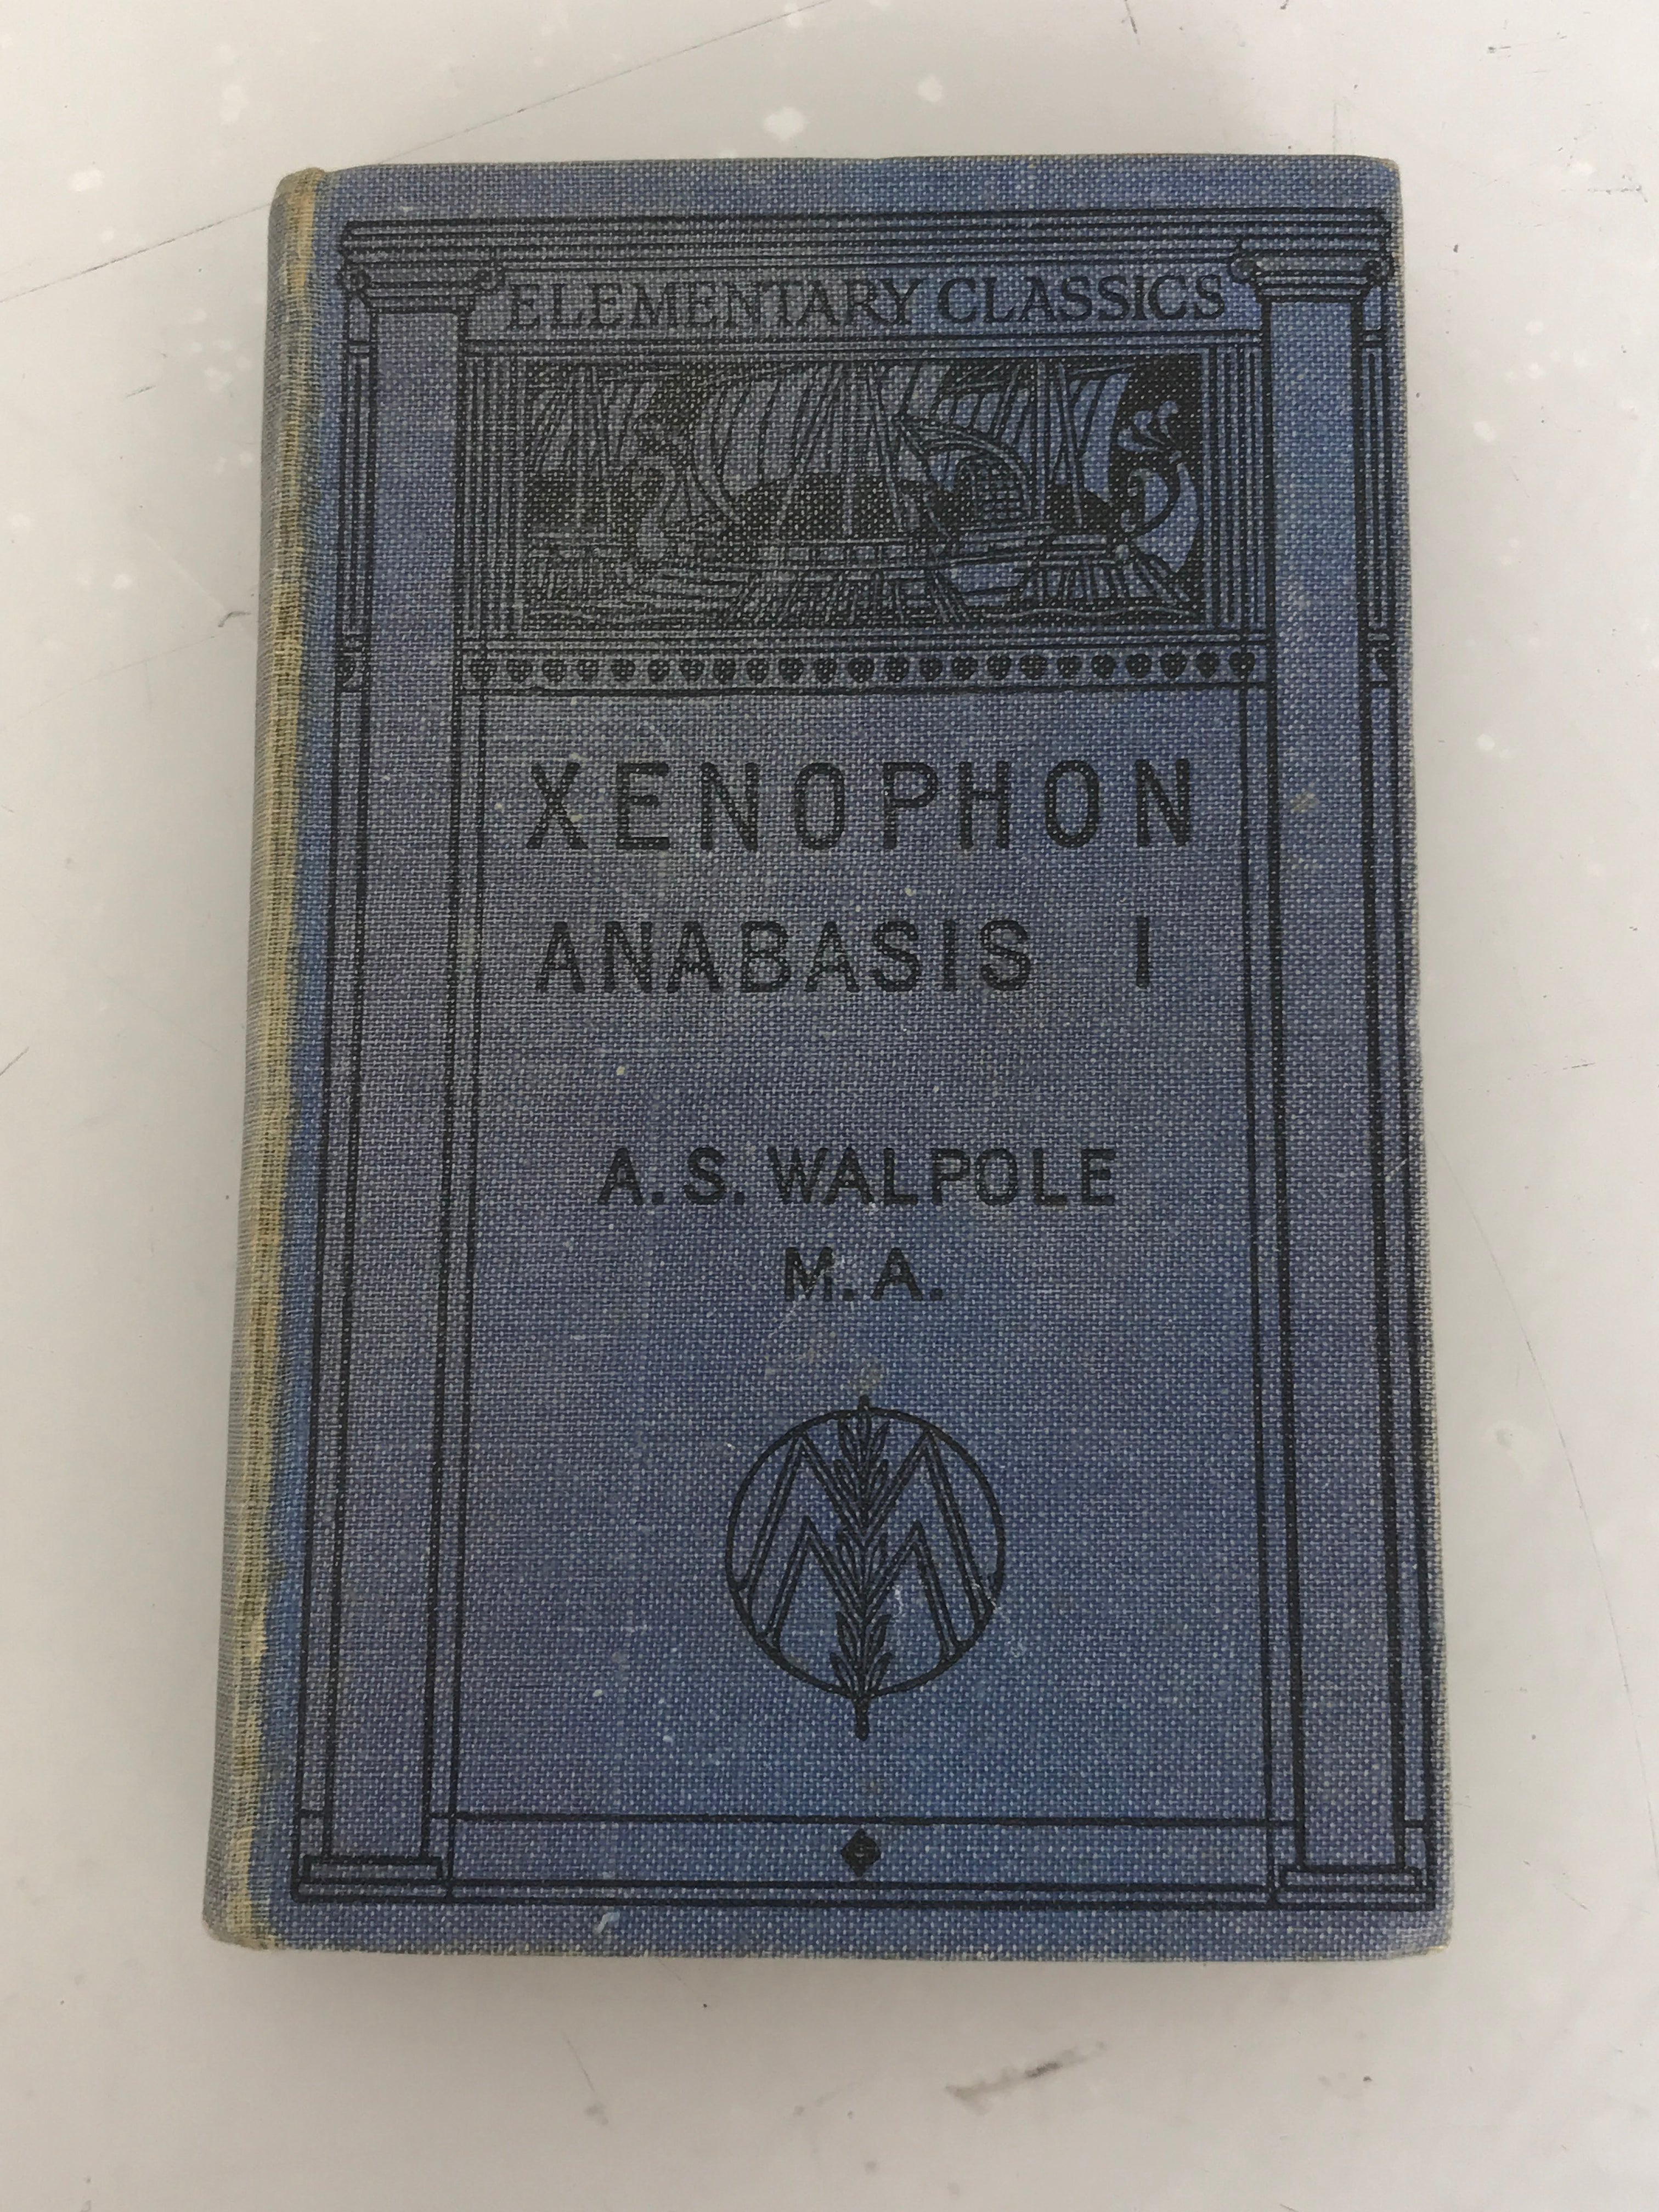 Xenophon Anabasis I by A.S. Walpole Elementary Classics 1952 HC